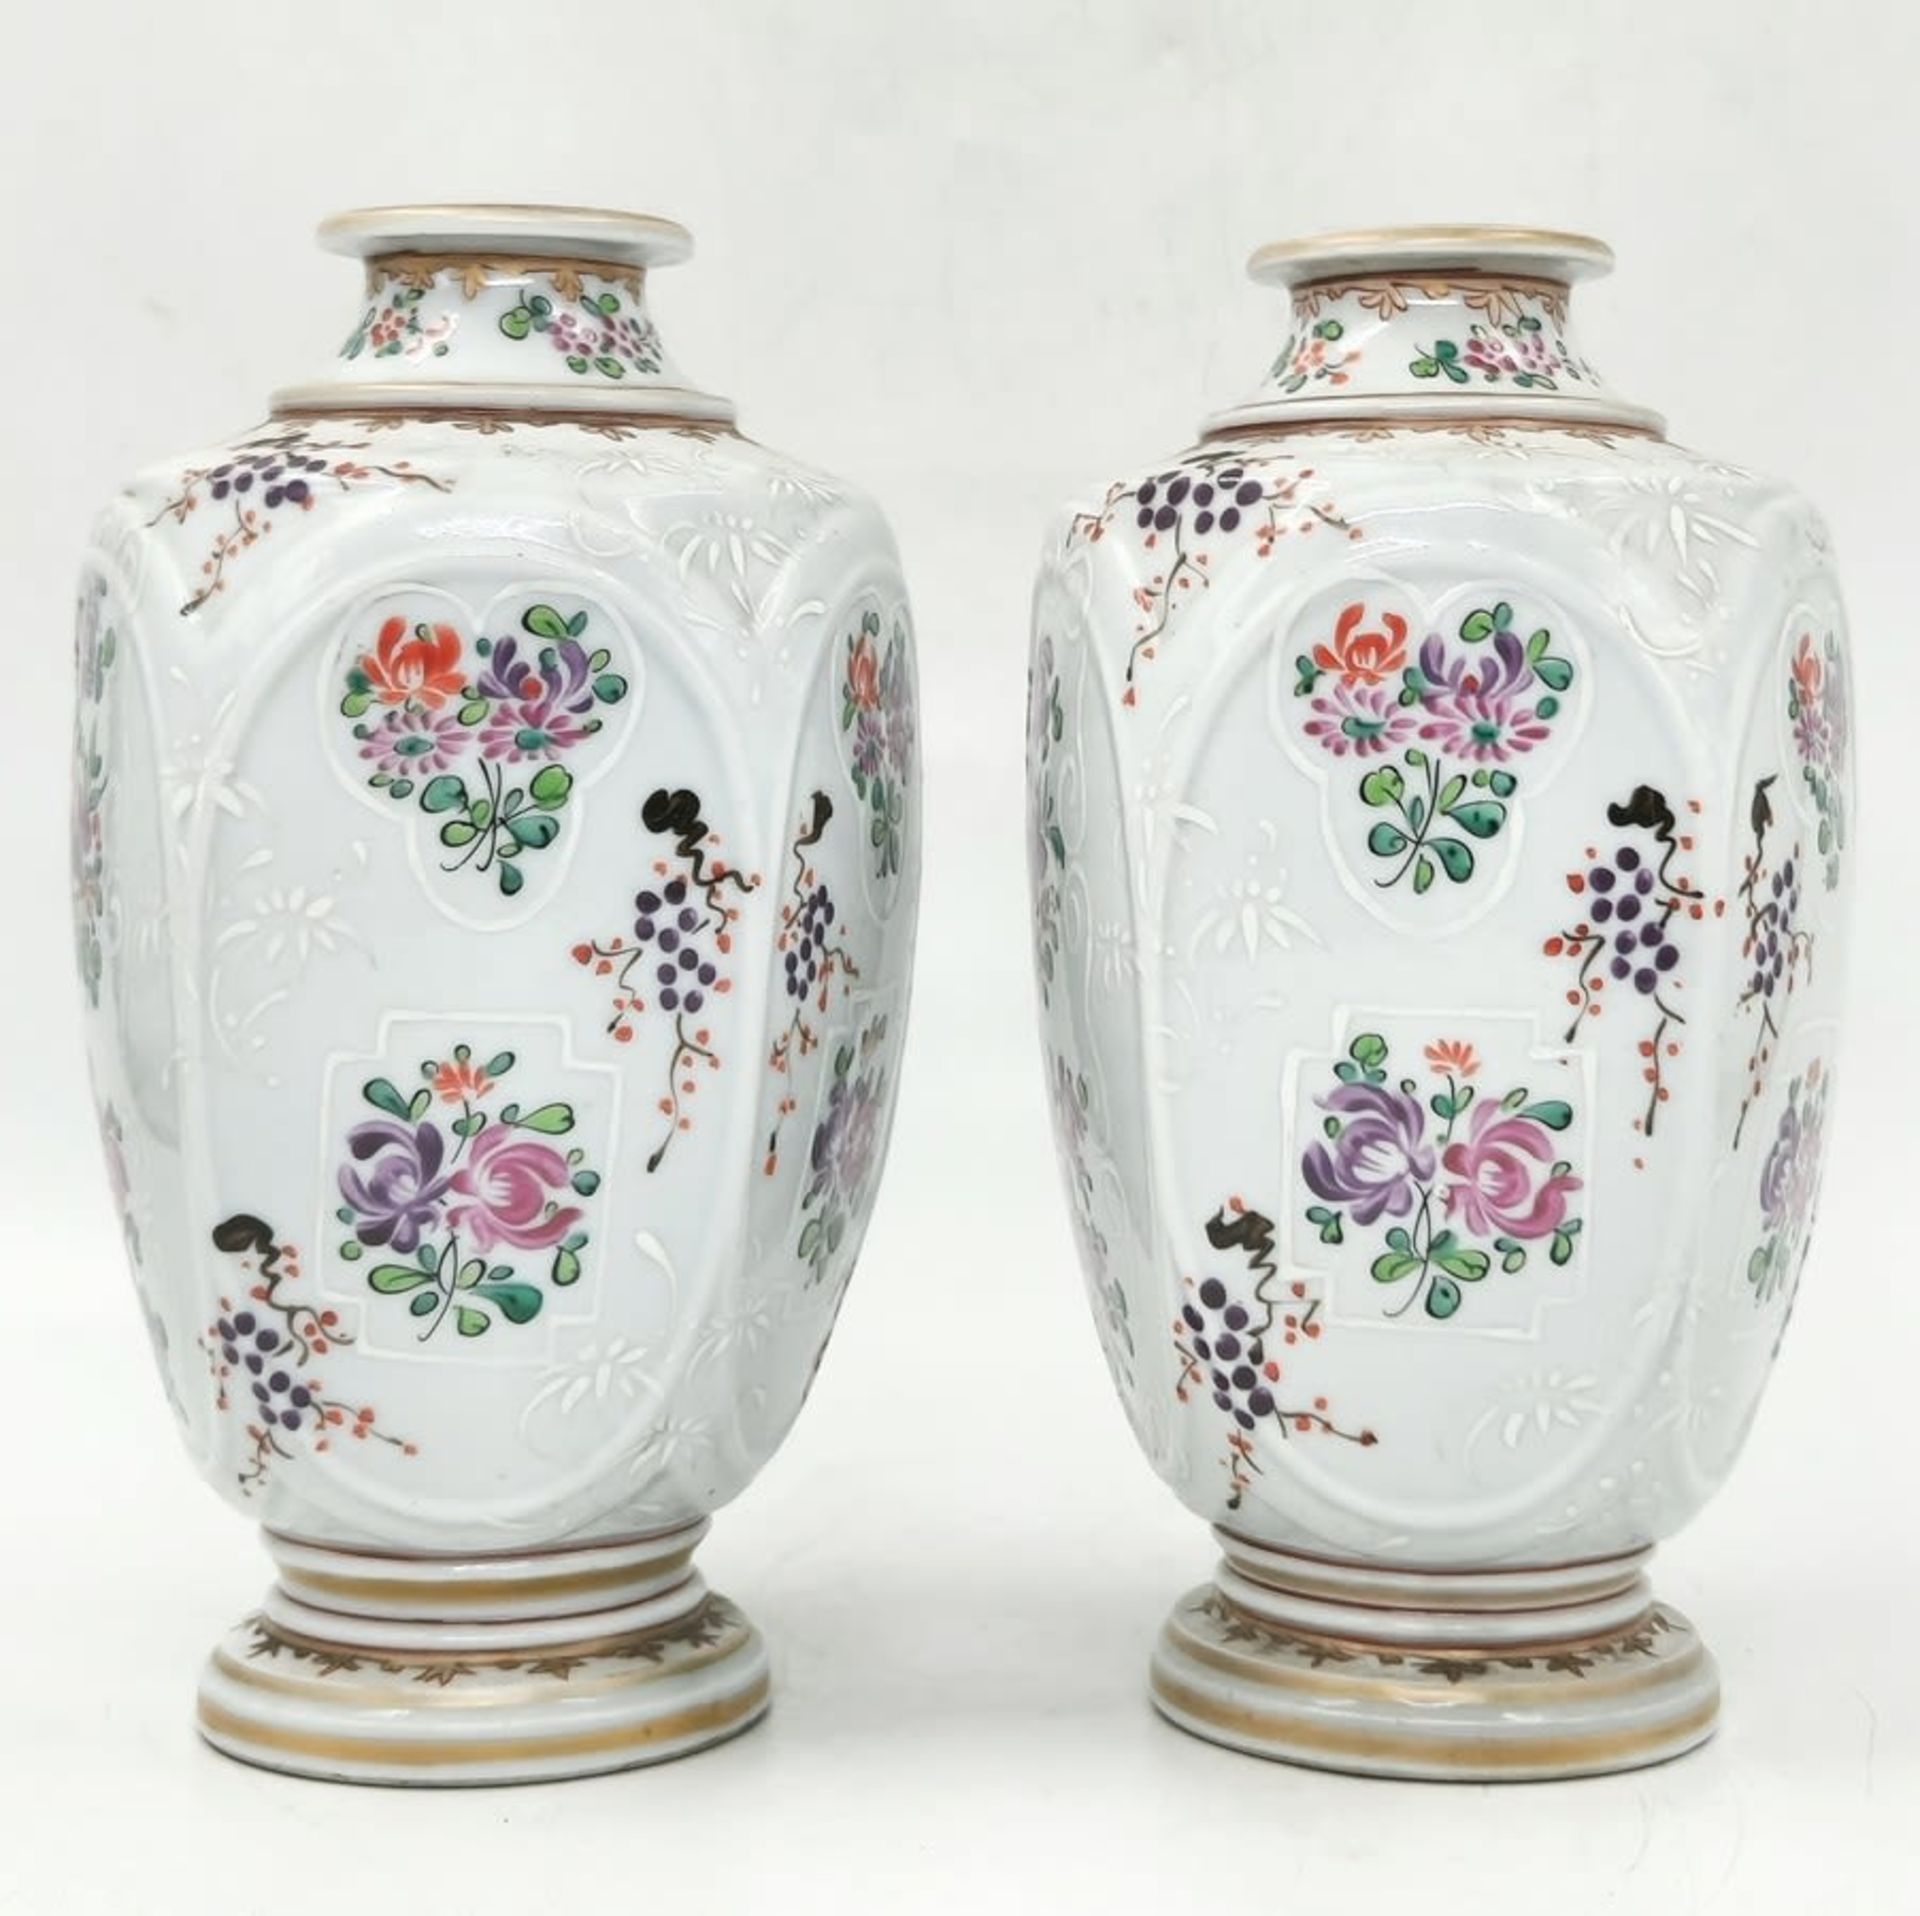 A pair of antique French porcelain jugs made by 'Edme Samson', decorated with enameled and signed - Bild 2 aus 4